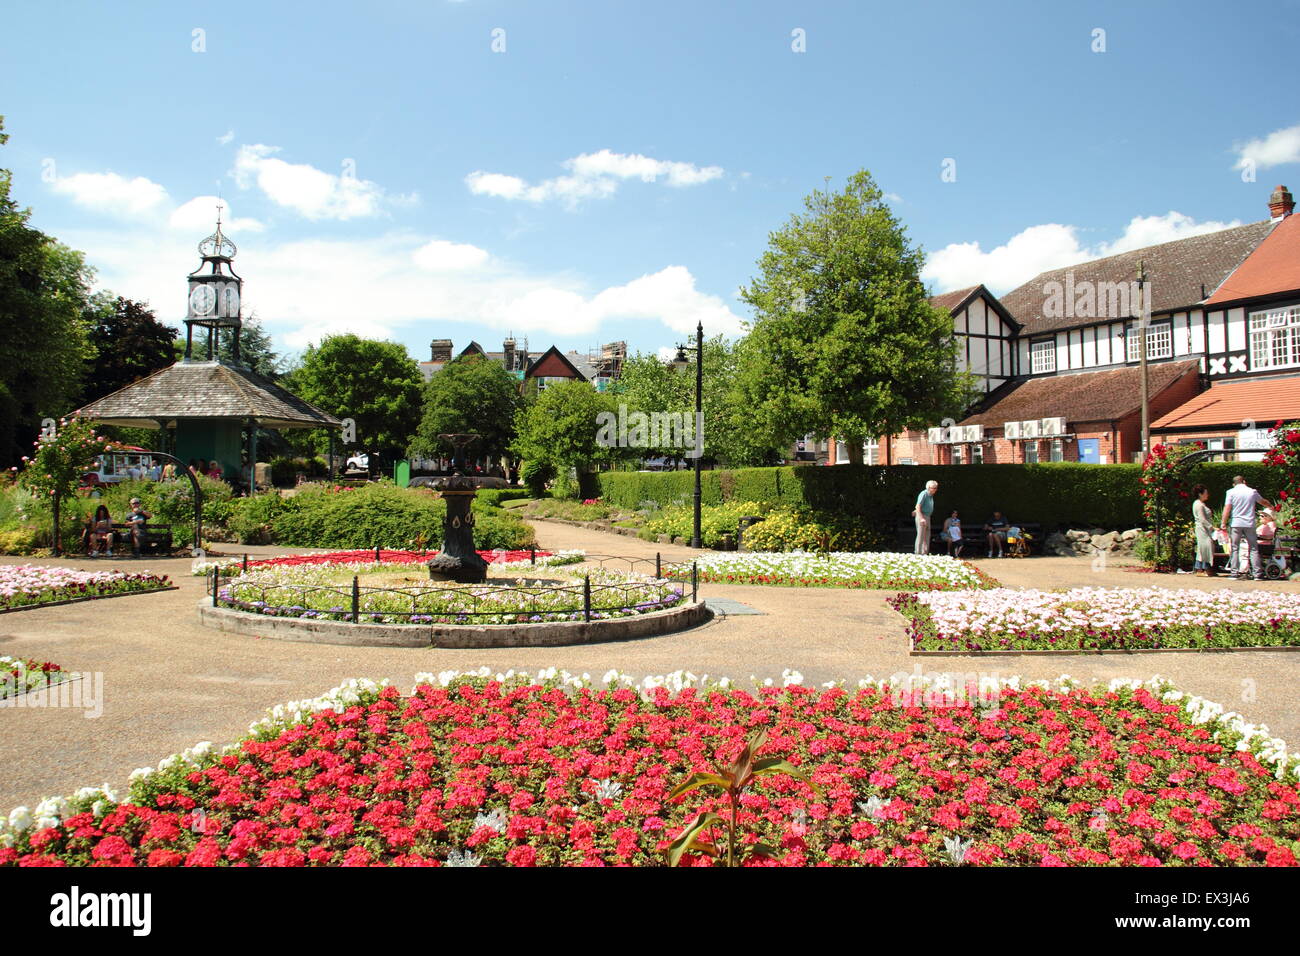 Flower beds in full bloom on a hot summer day at Hall Leys Park; a traditional English green space in Matlock, Derbyshire UK Stock Photo